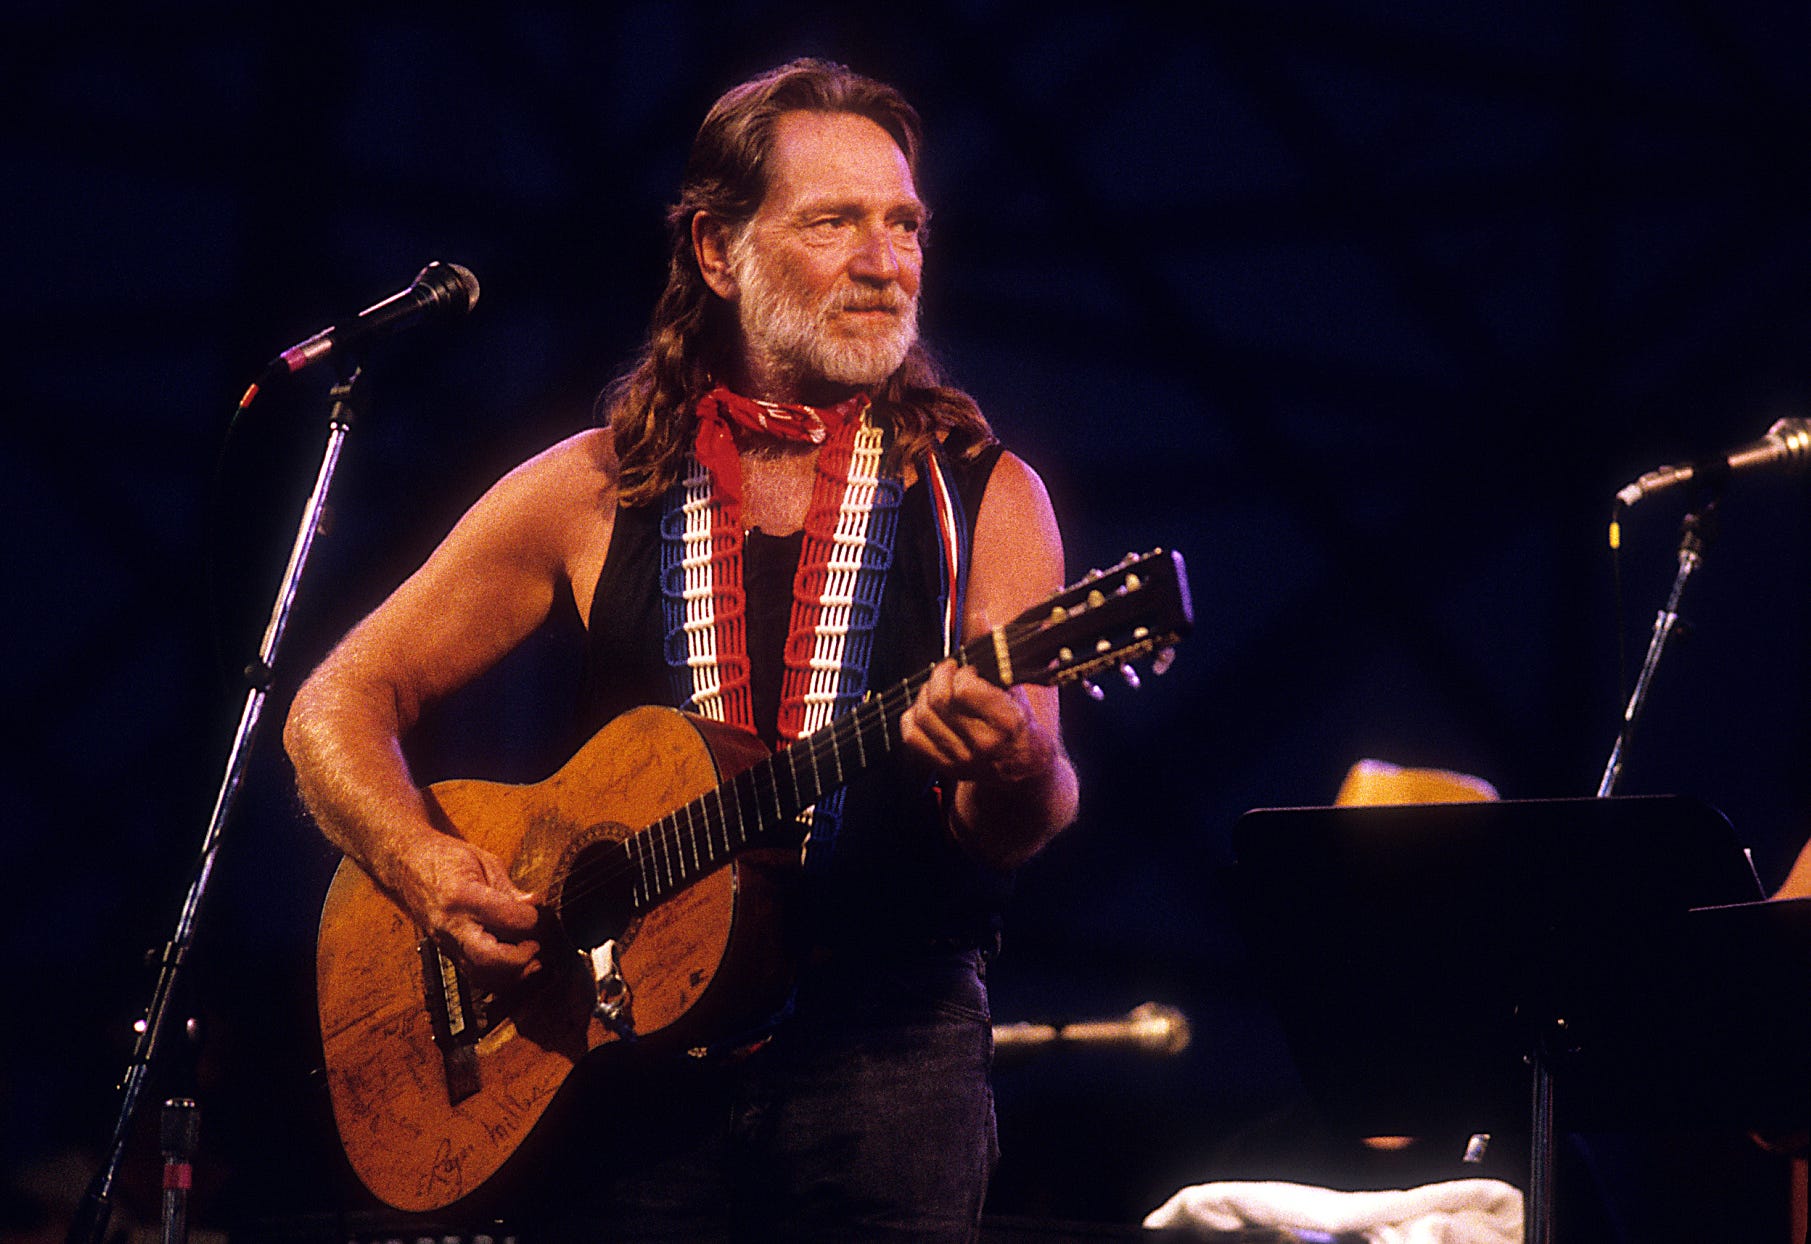 Willie Nelson performs at the Willie Nelson's 4th of July picnic event in Zilker Park on July 4, 1990.